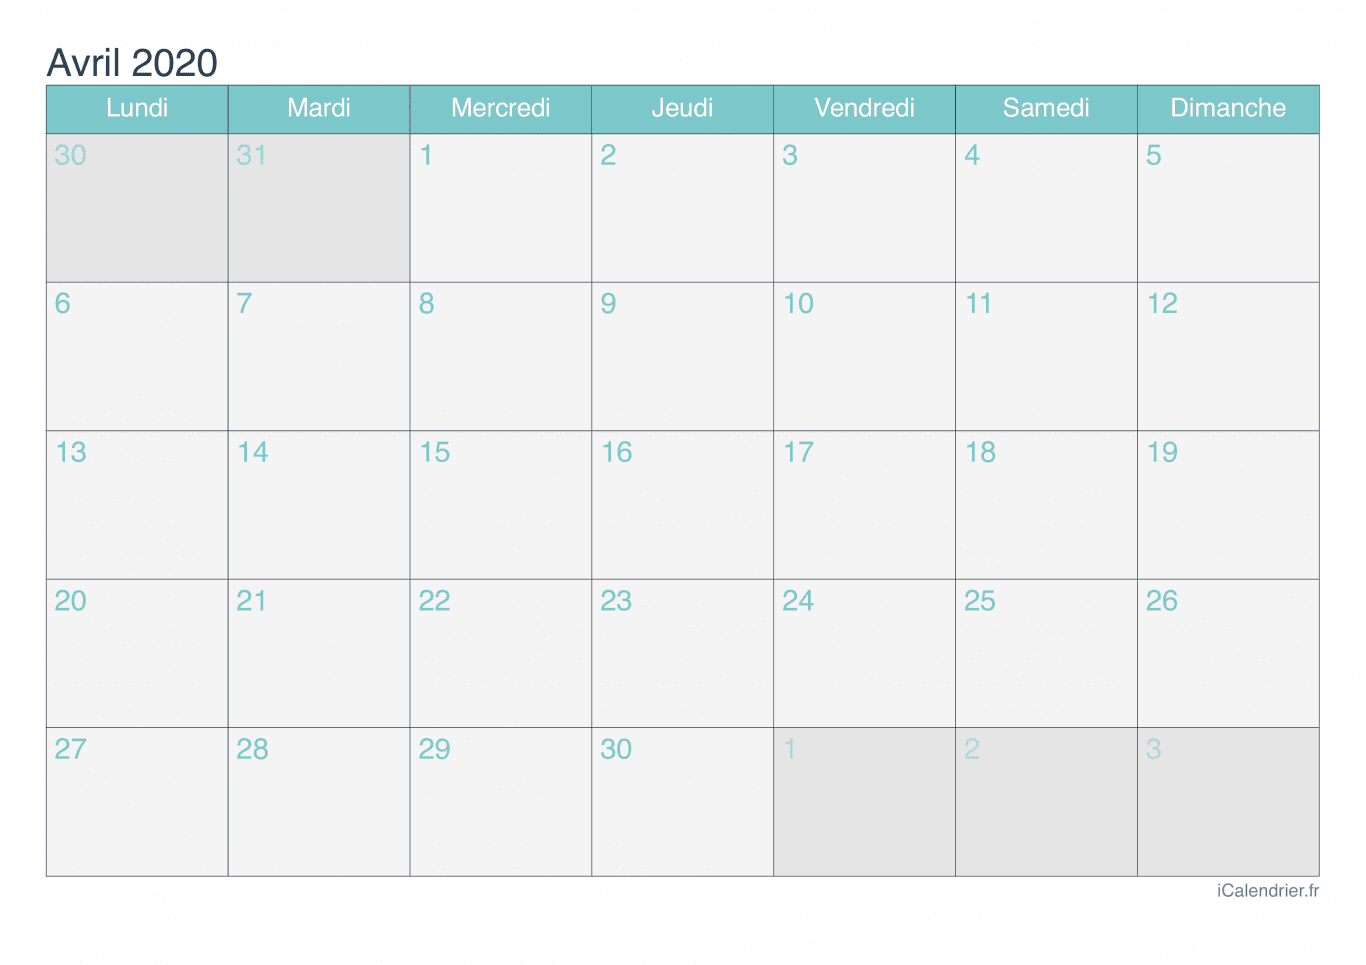 Calendrier d'avril 2020 - Turquoise